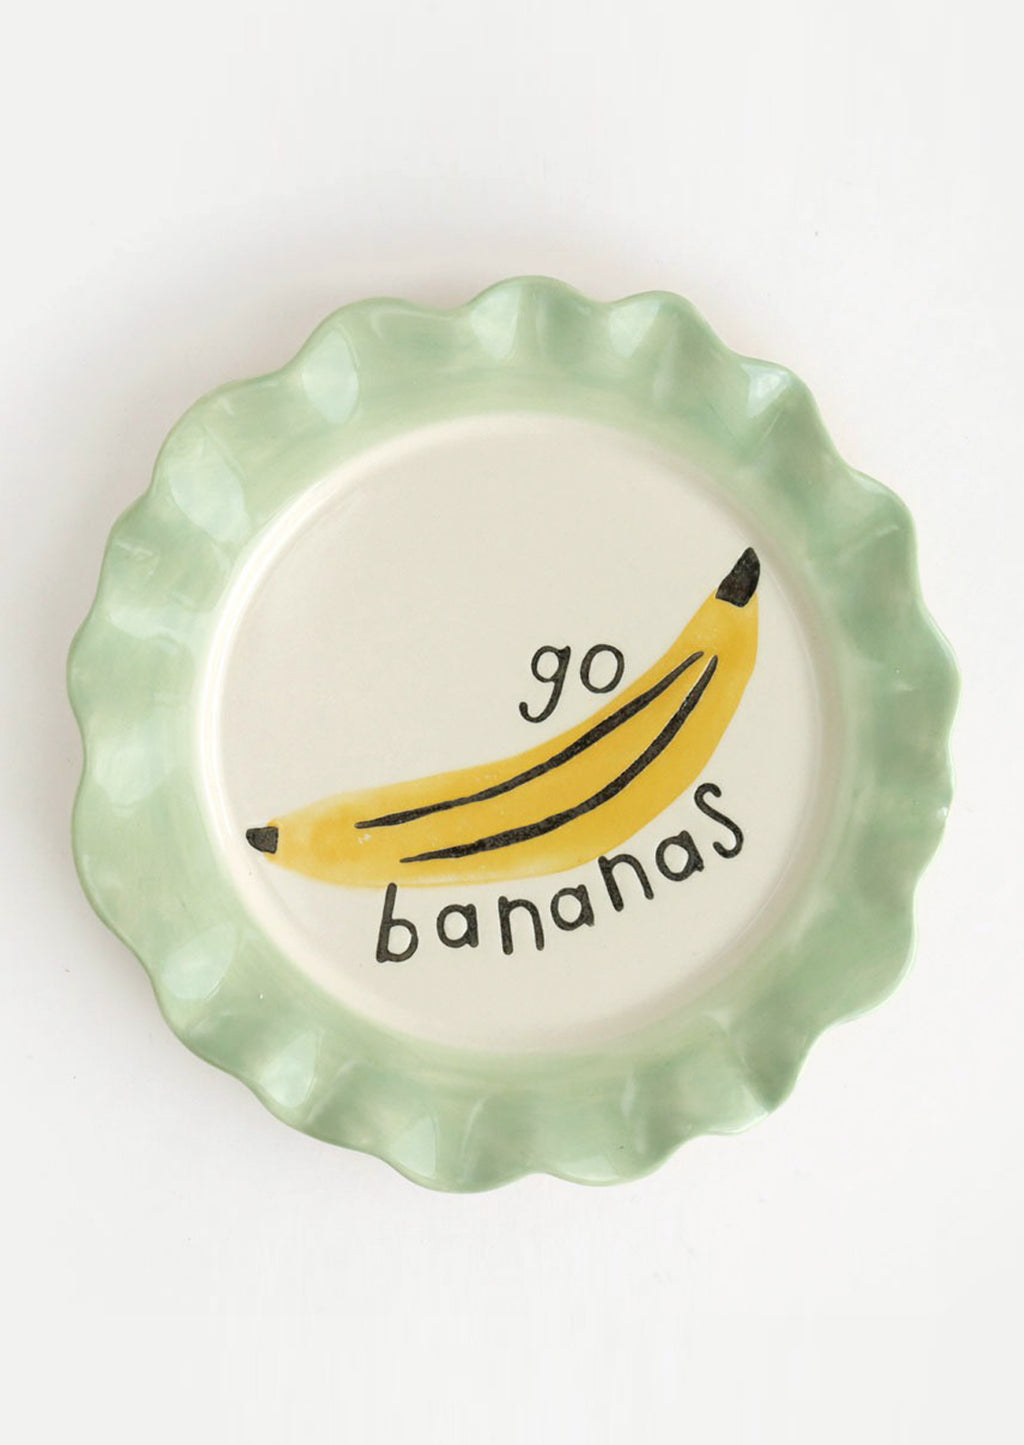 Go Bananas: A printed ceramic plate with mint colored rim and banana graphic, text reads "Go bananas".